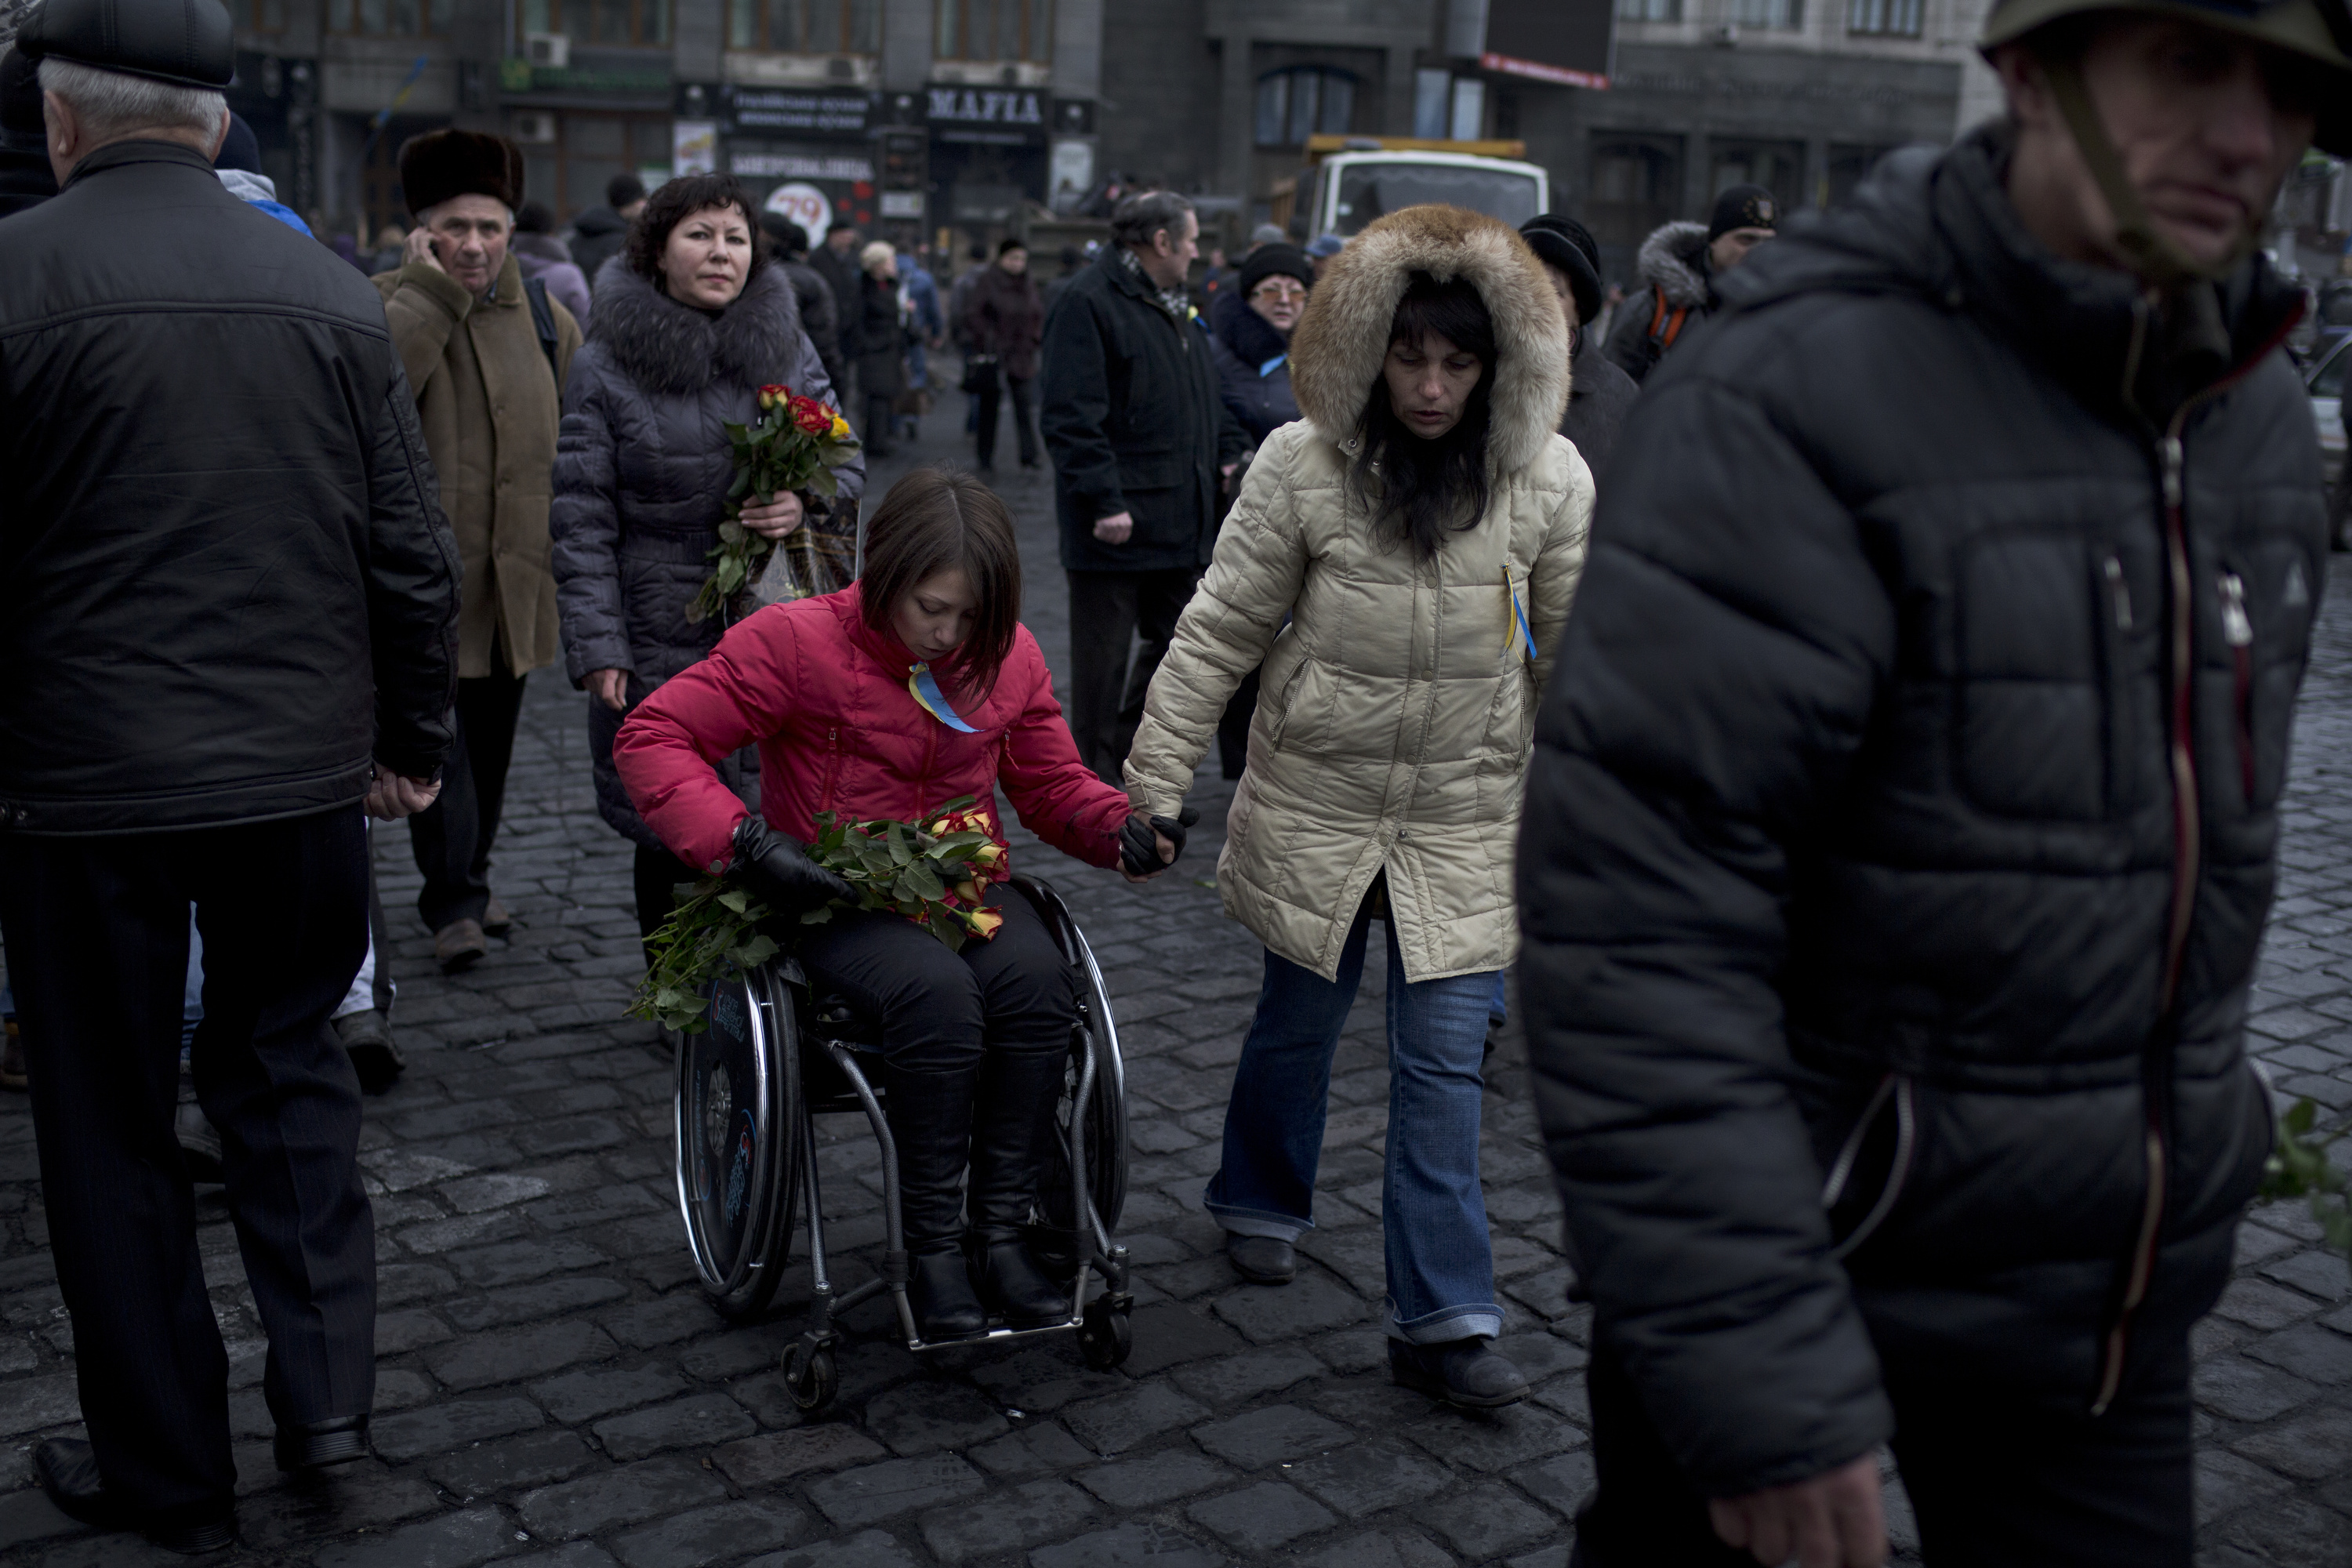 Women distribute flowers to anti-government protesters guarding the barricades in Independence Square in Kiev, Ukraine on Feb. 23, 2014. (Ed Ou/Reportage by Getty Images) 